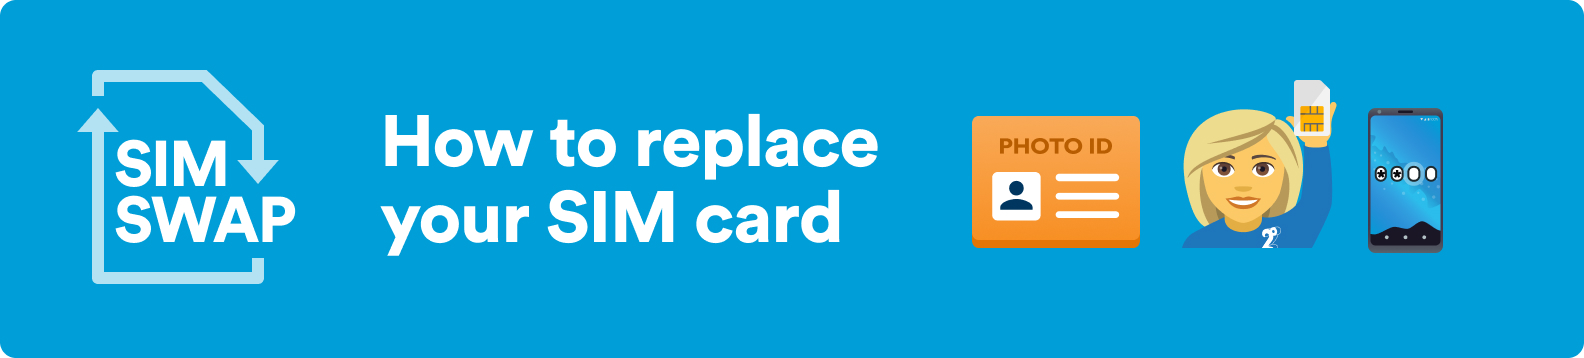 How to replace your SIM card